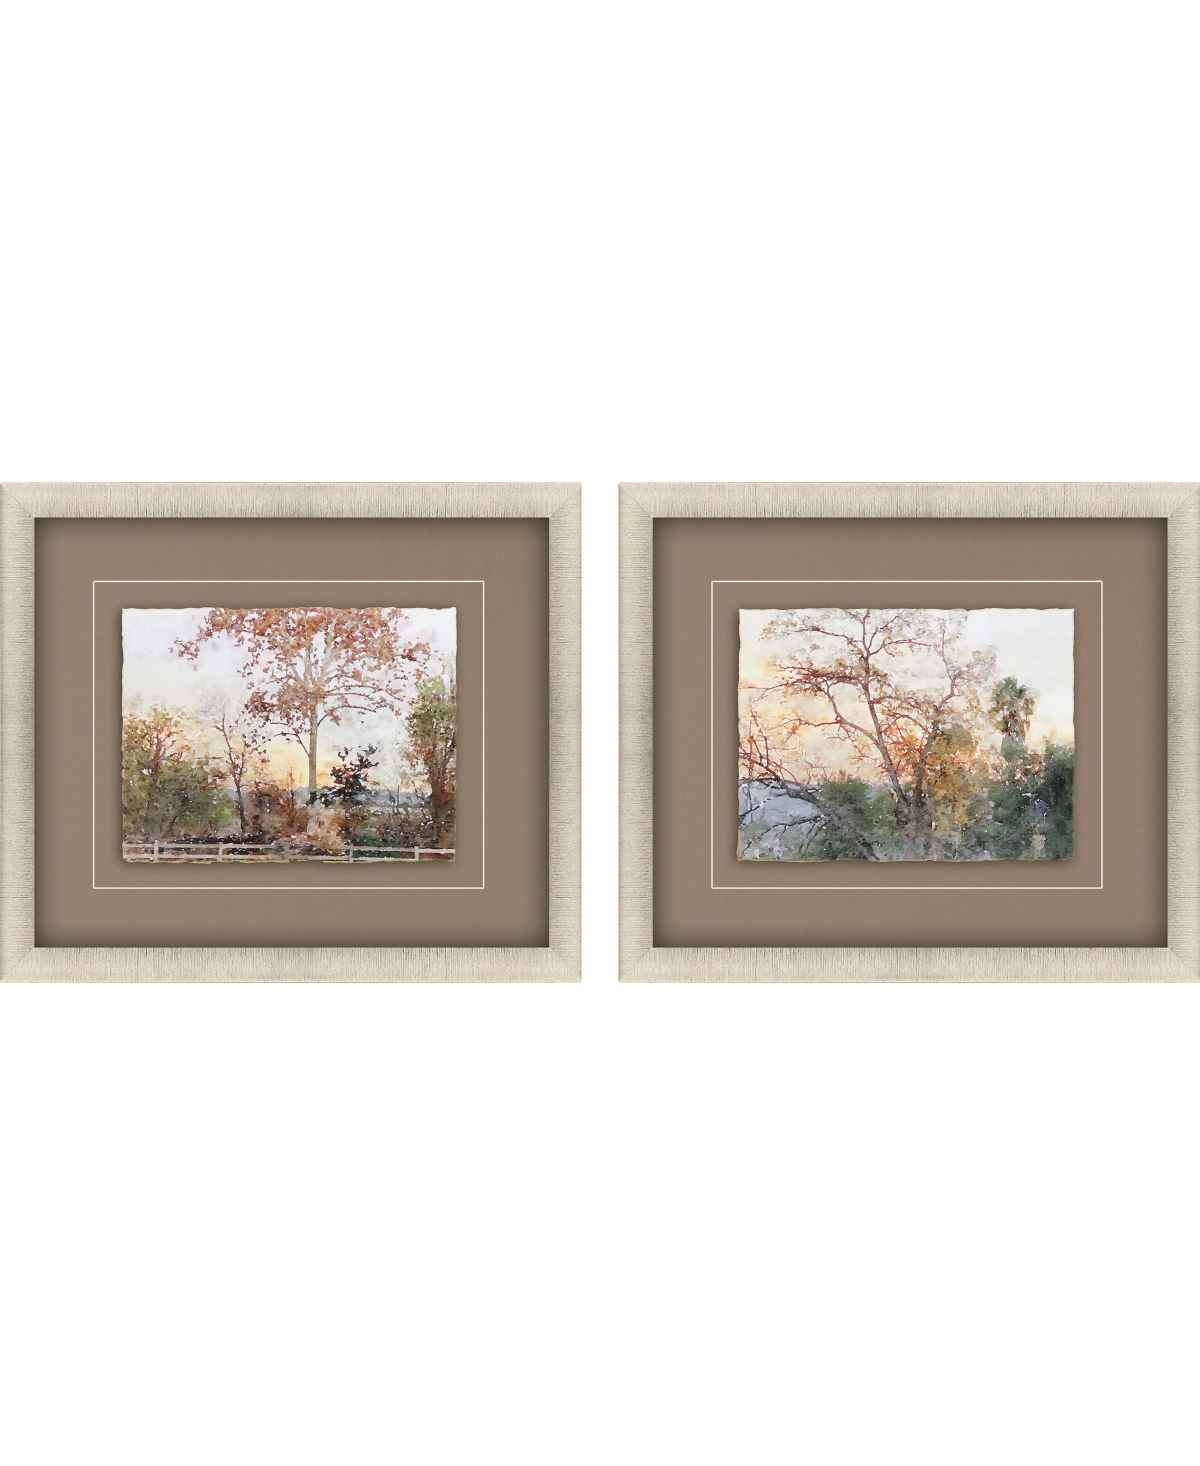 Paragon Picture Gallery Quiet Place Framed Art, Set Of 2 In Green